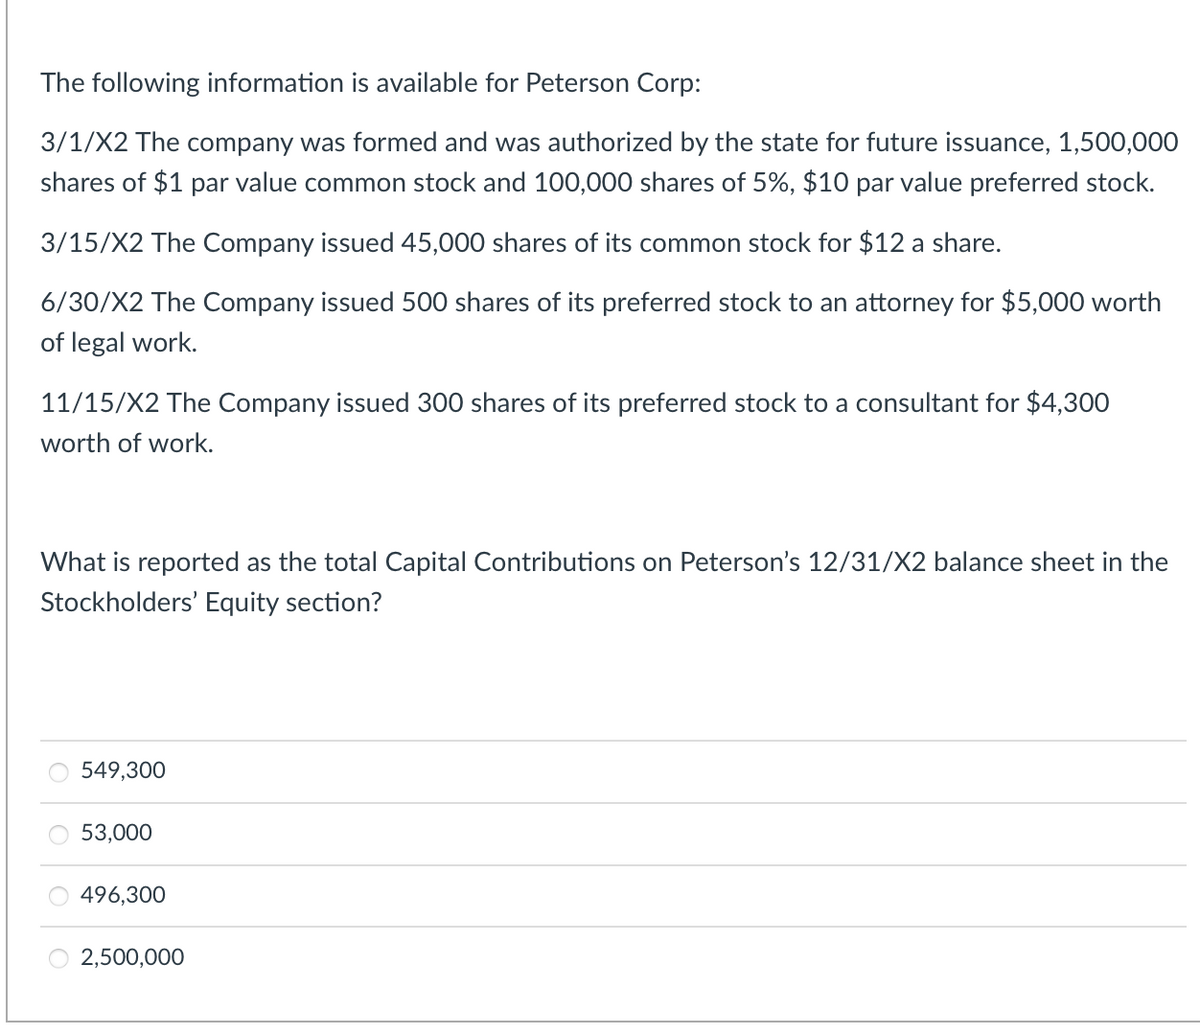 The following information is available for Peterson Corp:
3/1/X2 The company was formed and was authorized by the state for future issuance, 1,500,000
shares of $1 par value common stock and 100,000 shares of 5%, $10 par value preferred stock.
3/15/X2 The Company issued 45,000 shares of its common stock for $12 a share.
6/30/X2 The Company issued 500 shares of its preferred stock to an attorney for $5,000 worth
of legal work.
11/15/X2 The Company issued 300 shares of its preferred stock to a consultant for $4,300
worth of work.
What is reported as the total Capital Contributions on Peterson's 12/31/X2 balance sheet in the
Stockholders' Equity section?
549,300
53,000
496,300
2,500,000
